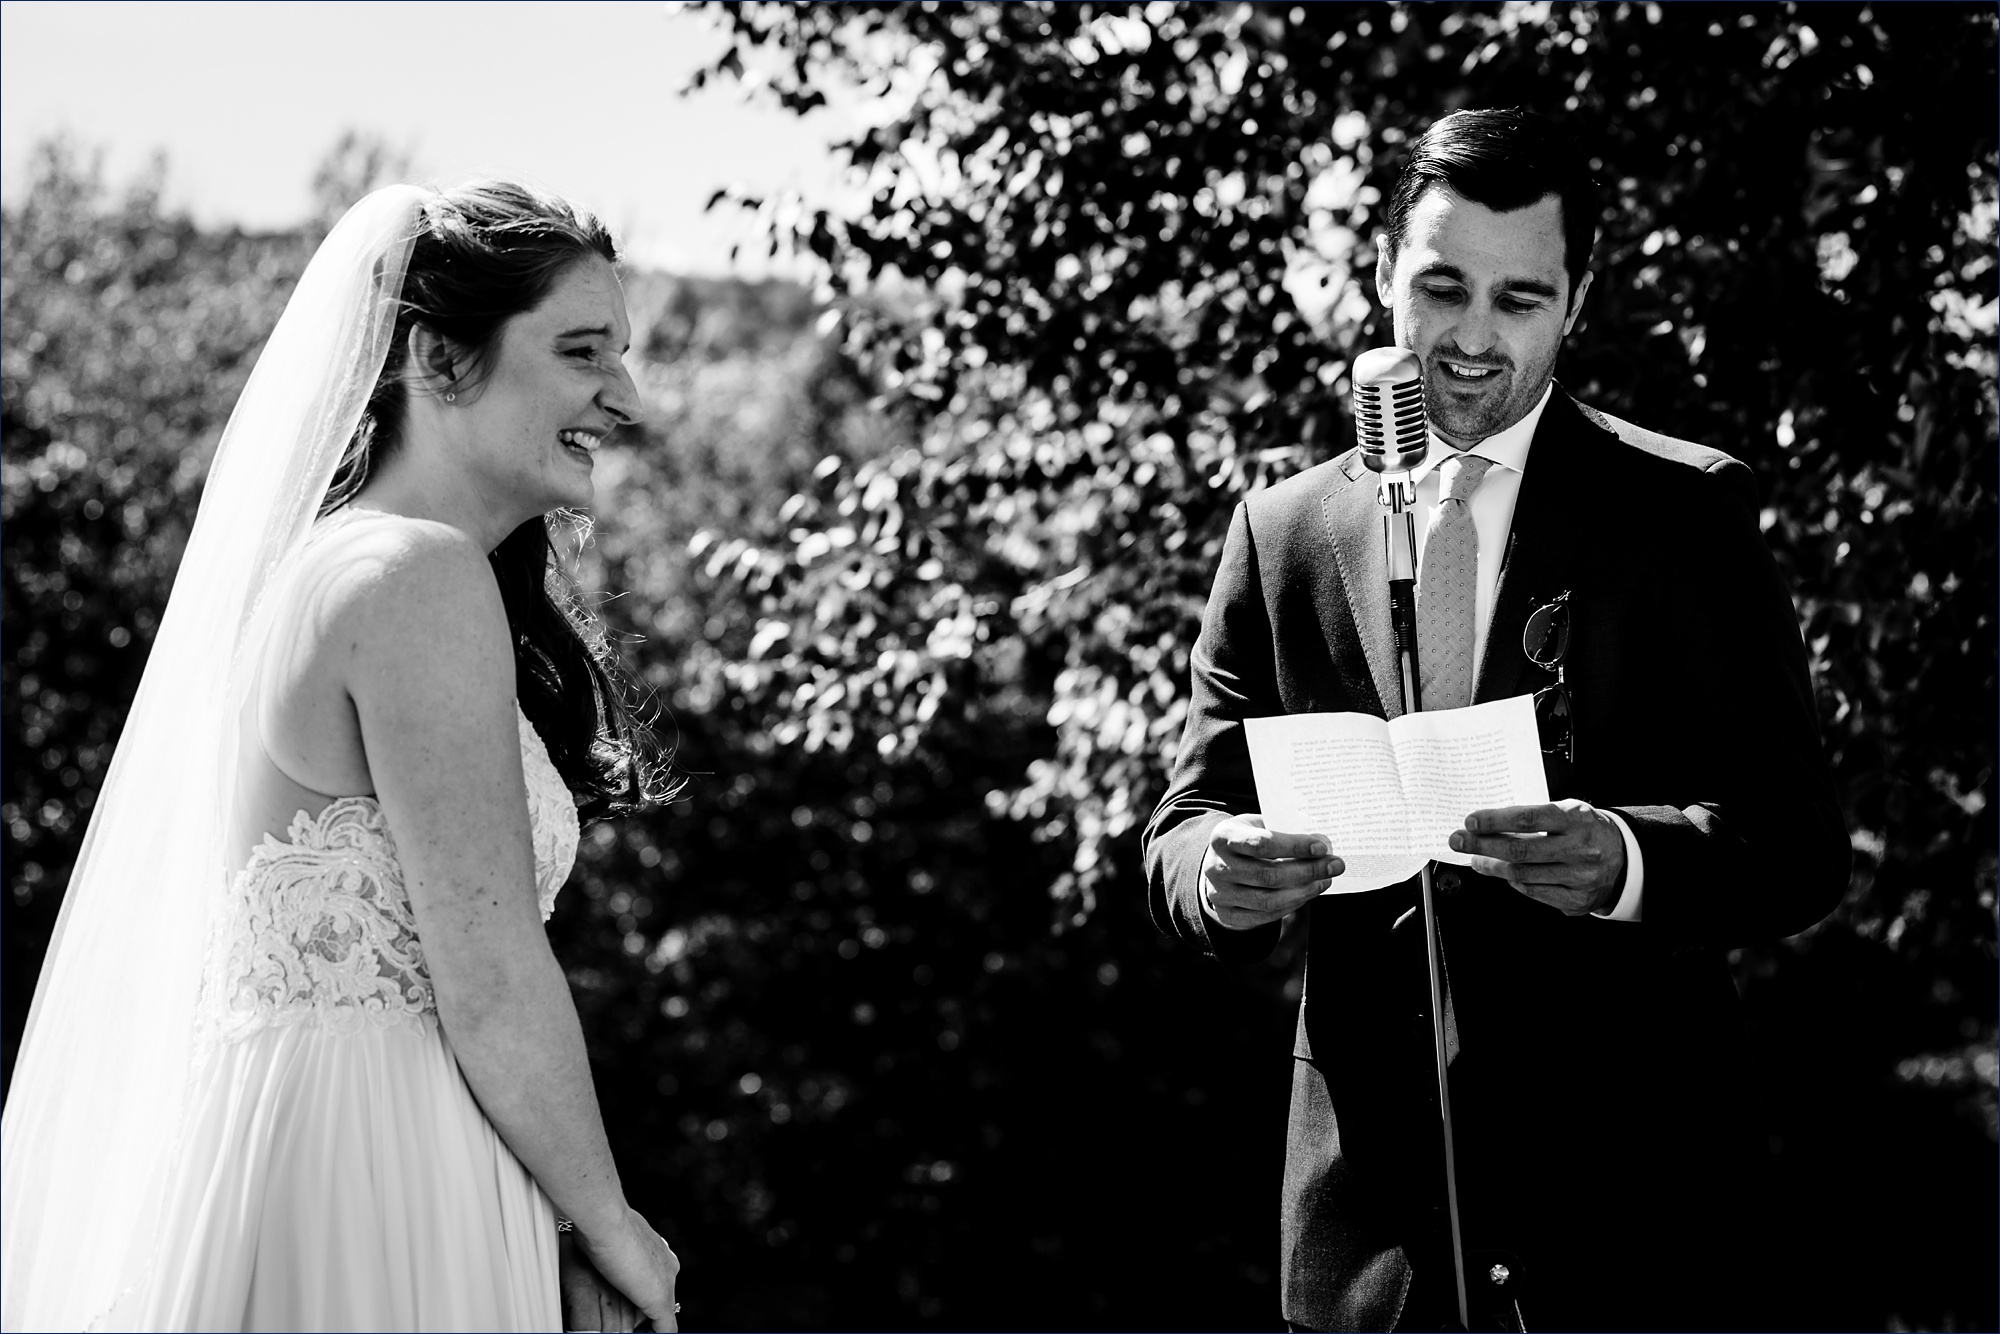 The groom reads his vows to the bride at Kitz Farm